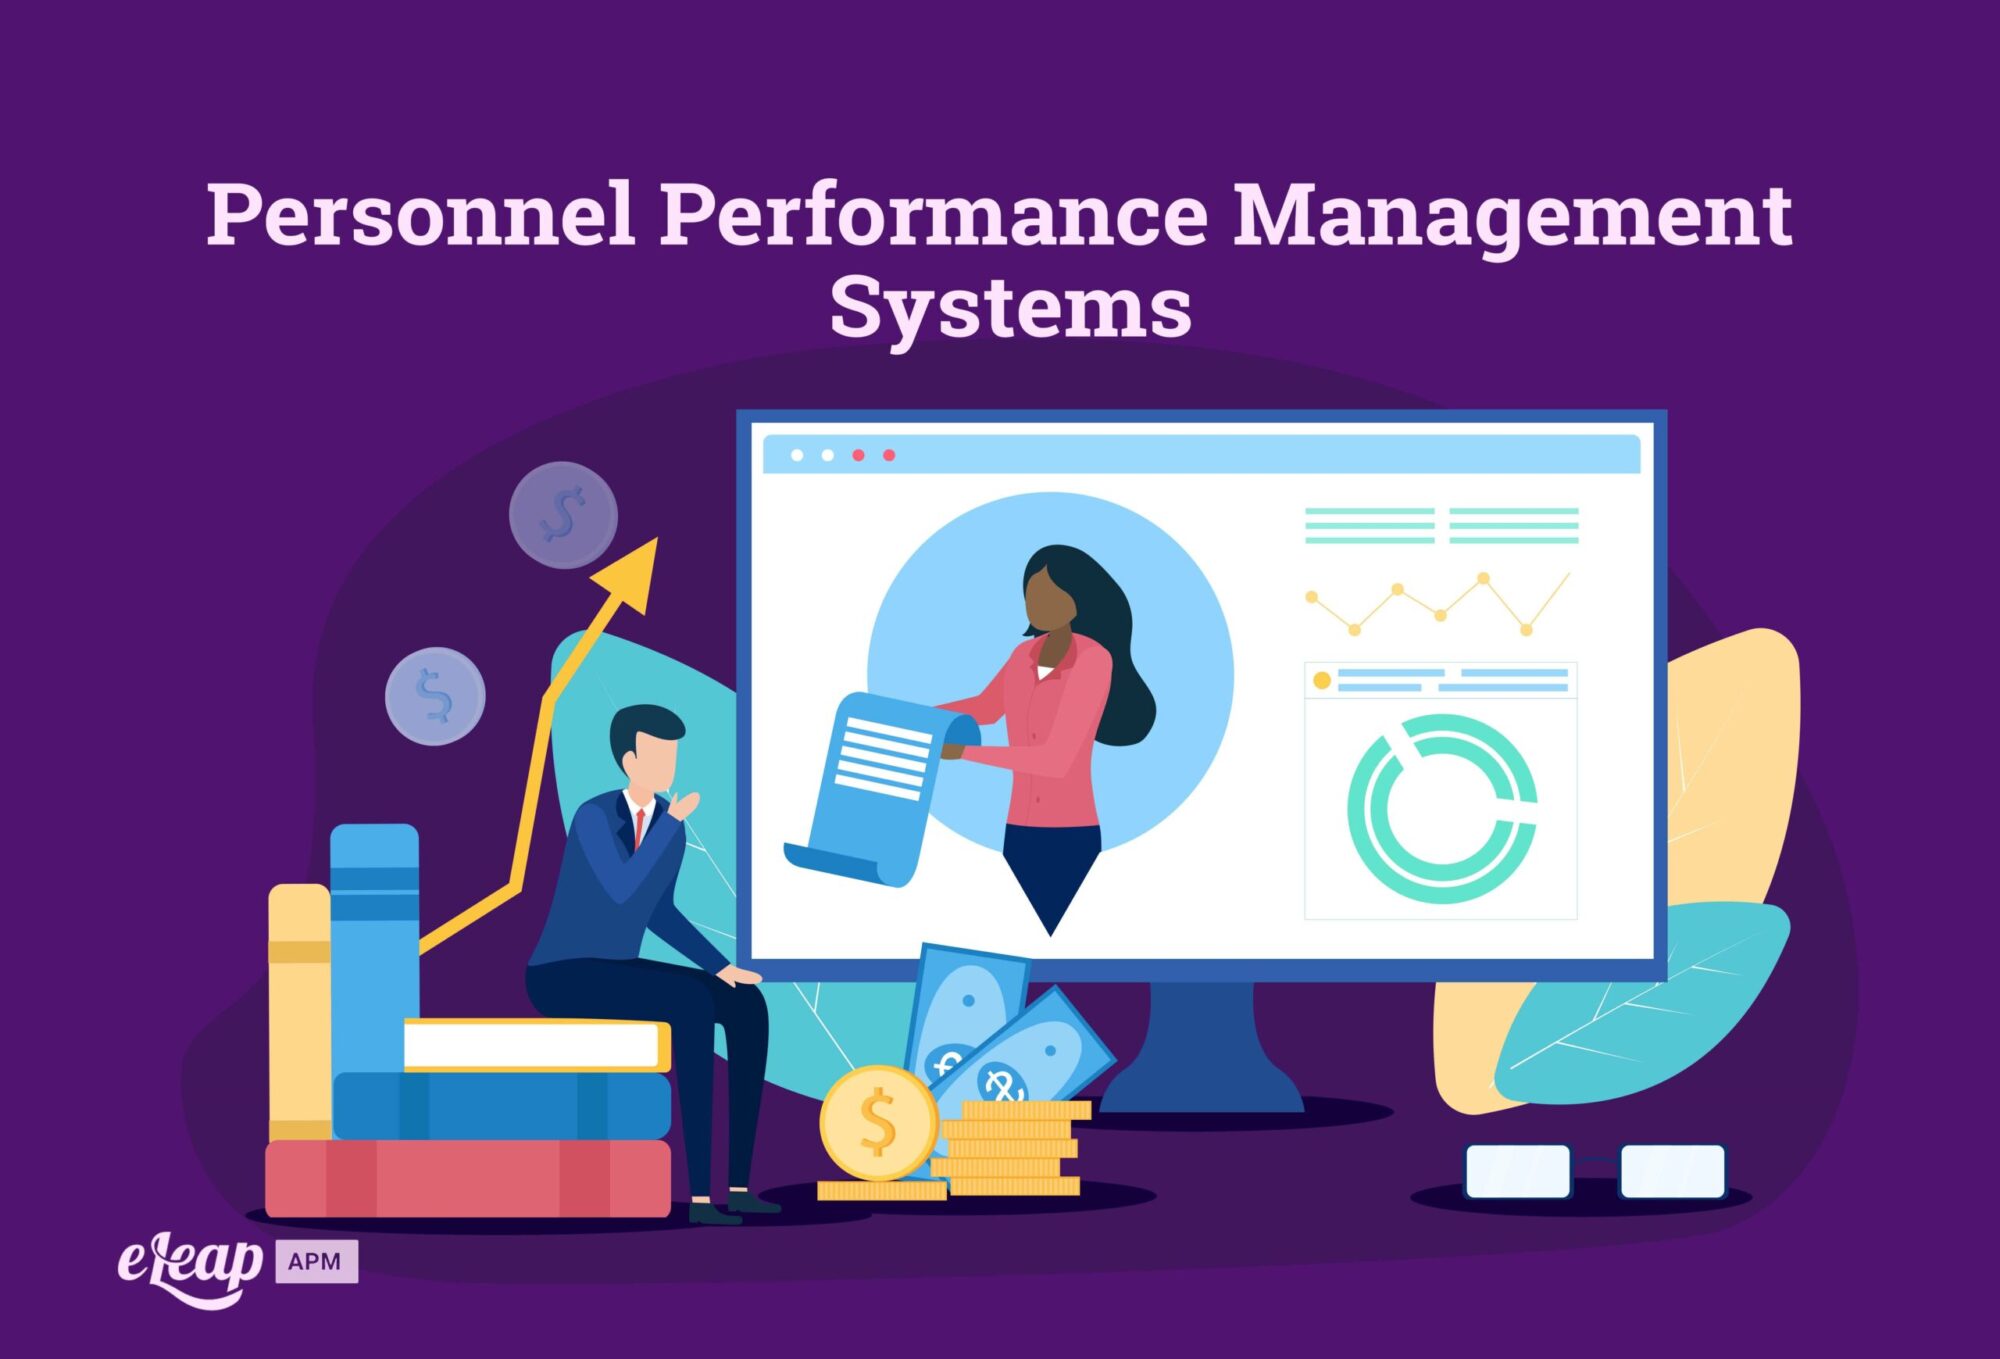 Personnel Performance Management Systems